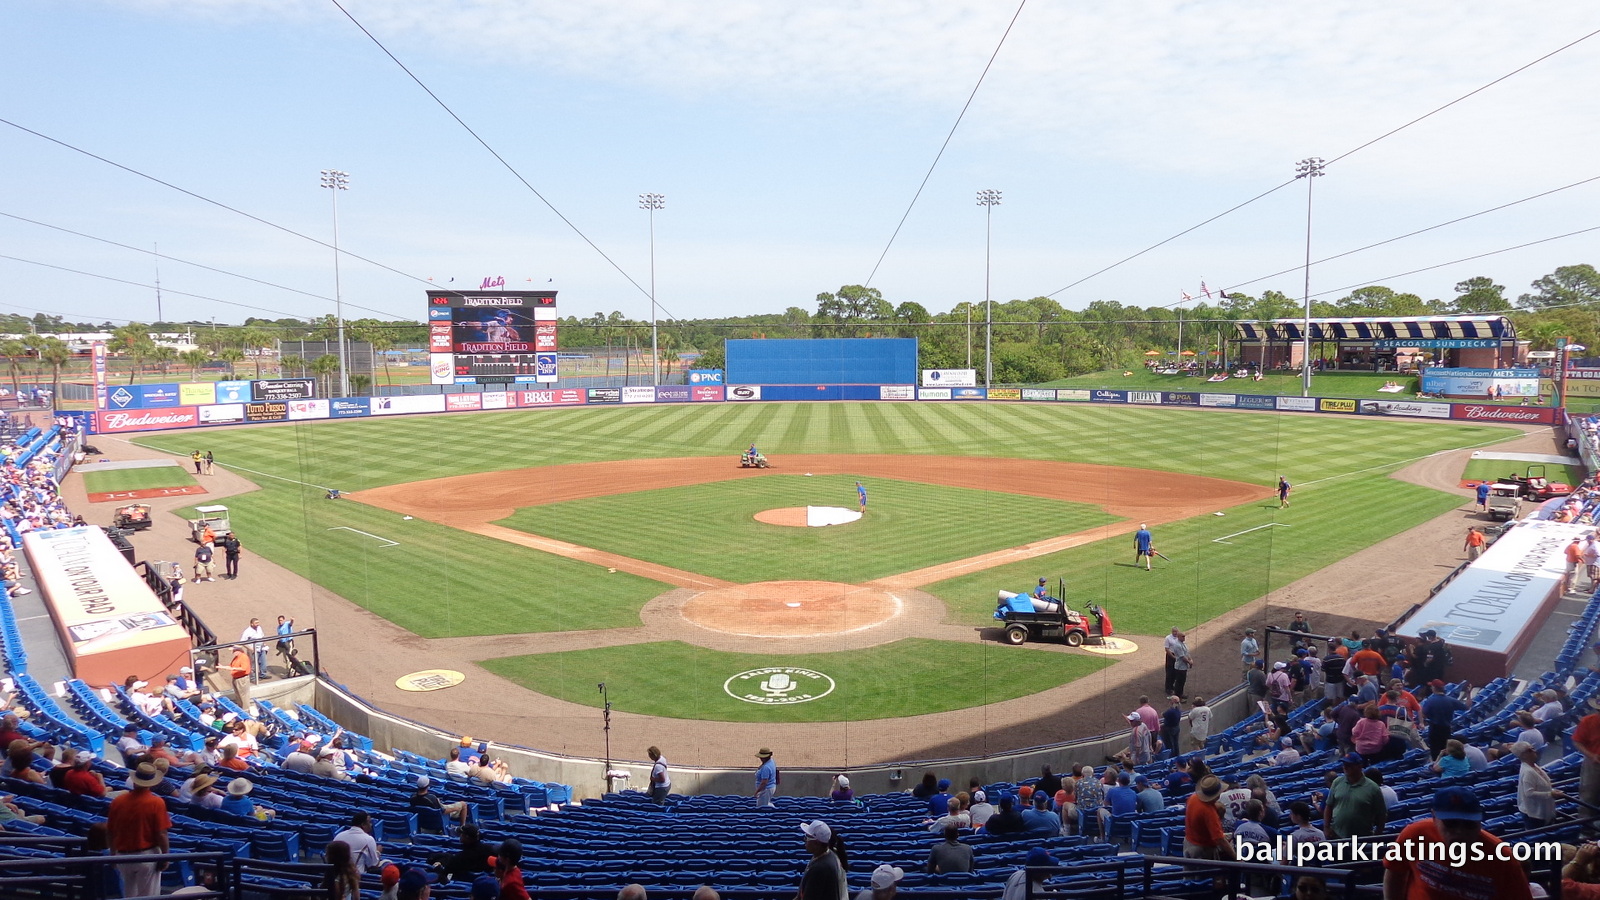 Port St. Lucie has grown up since the Mets arrived in 1988